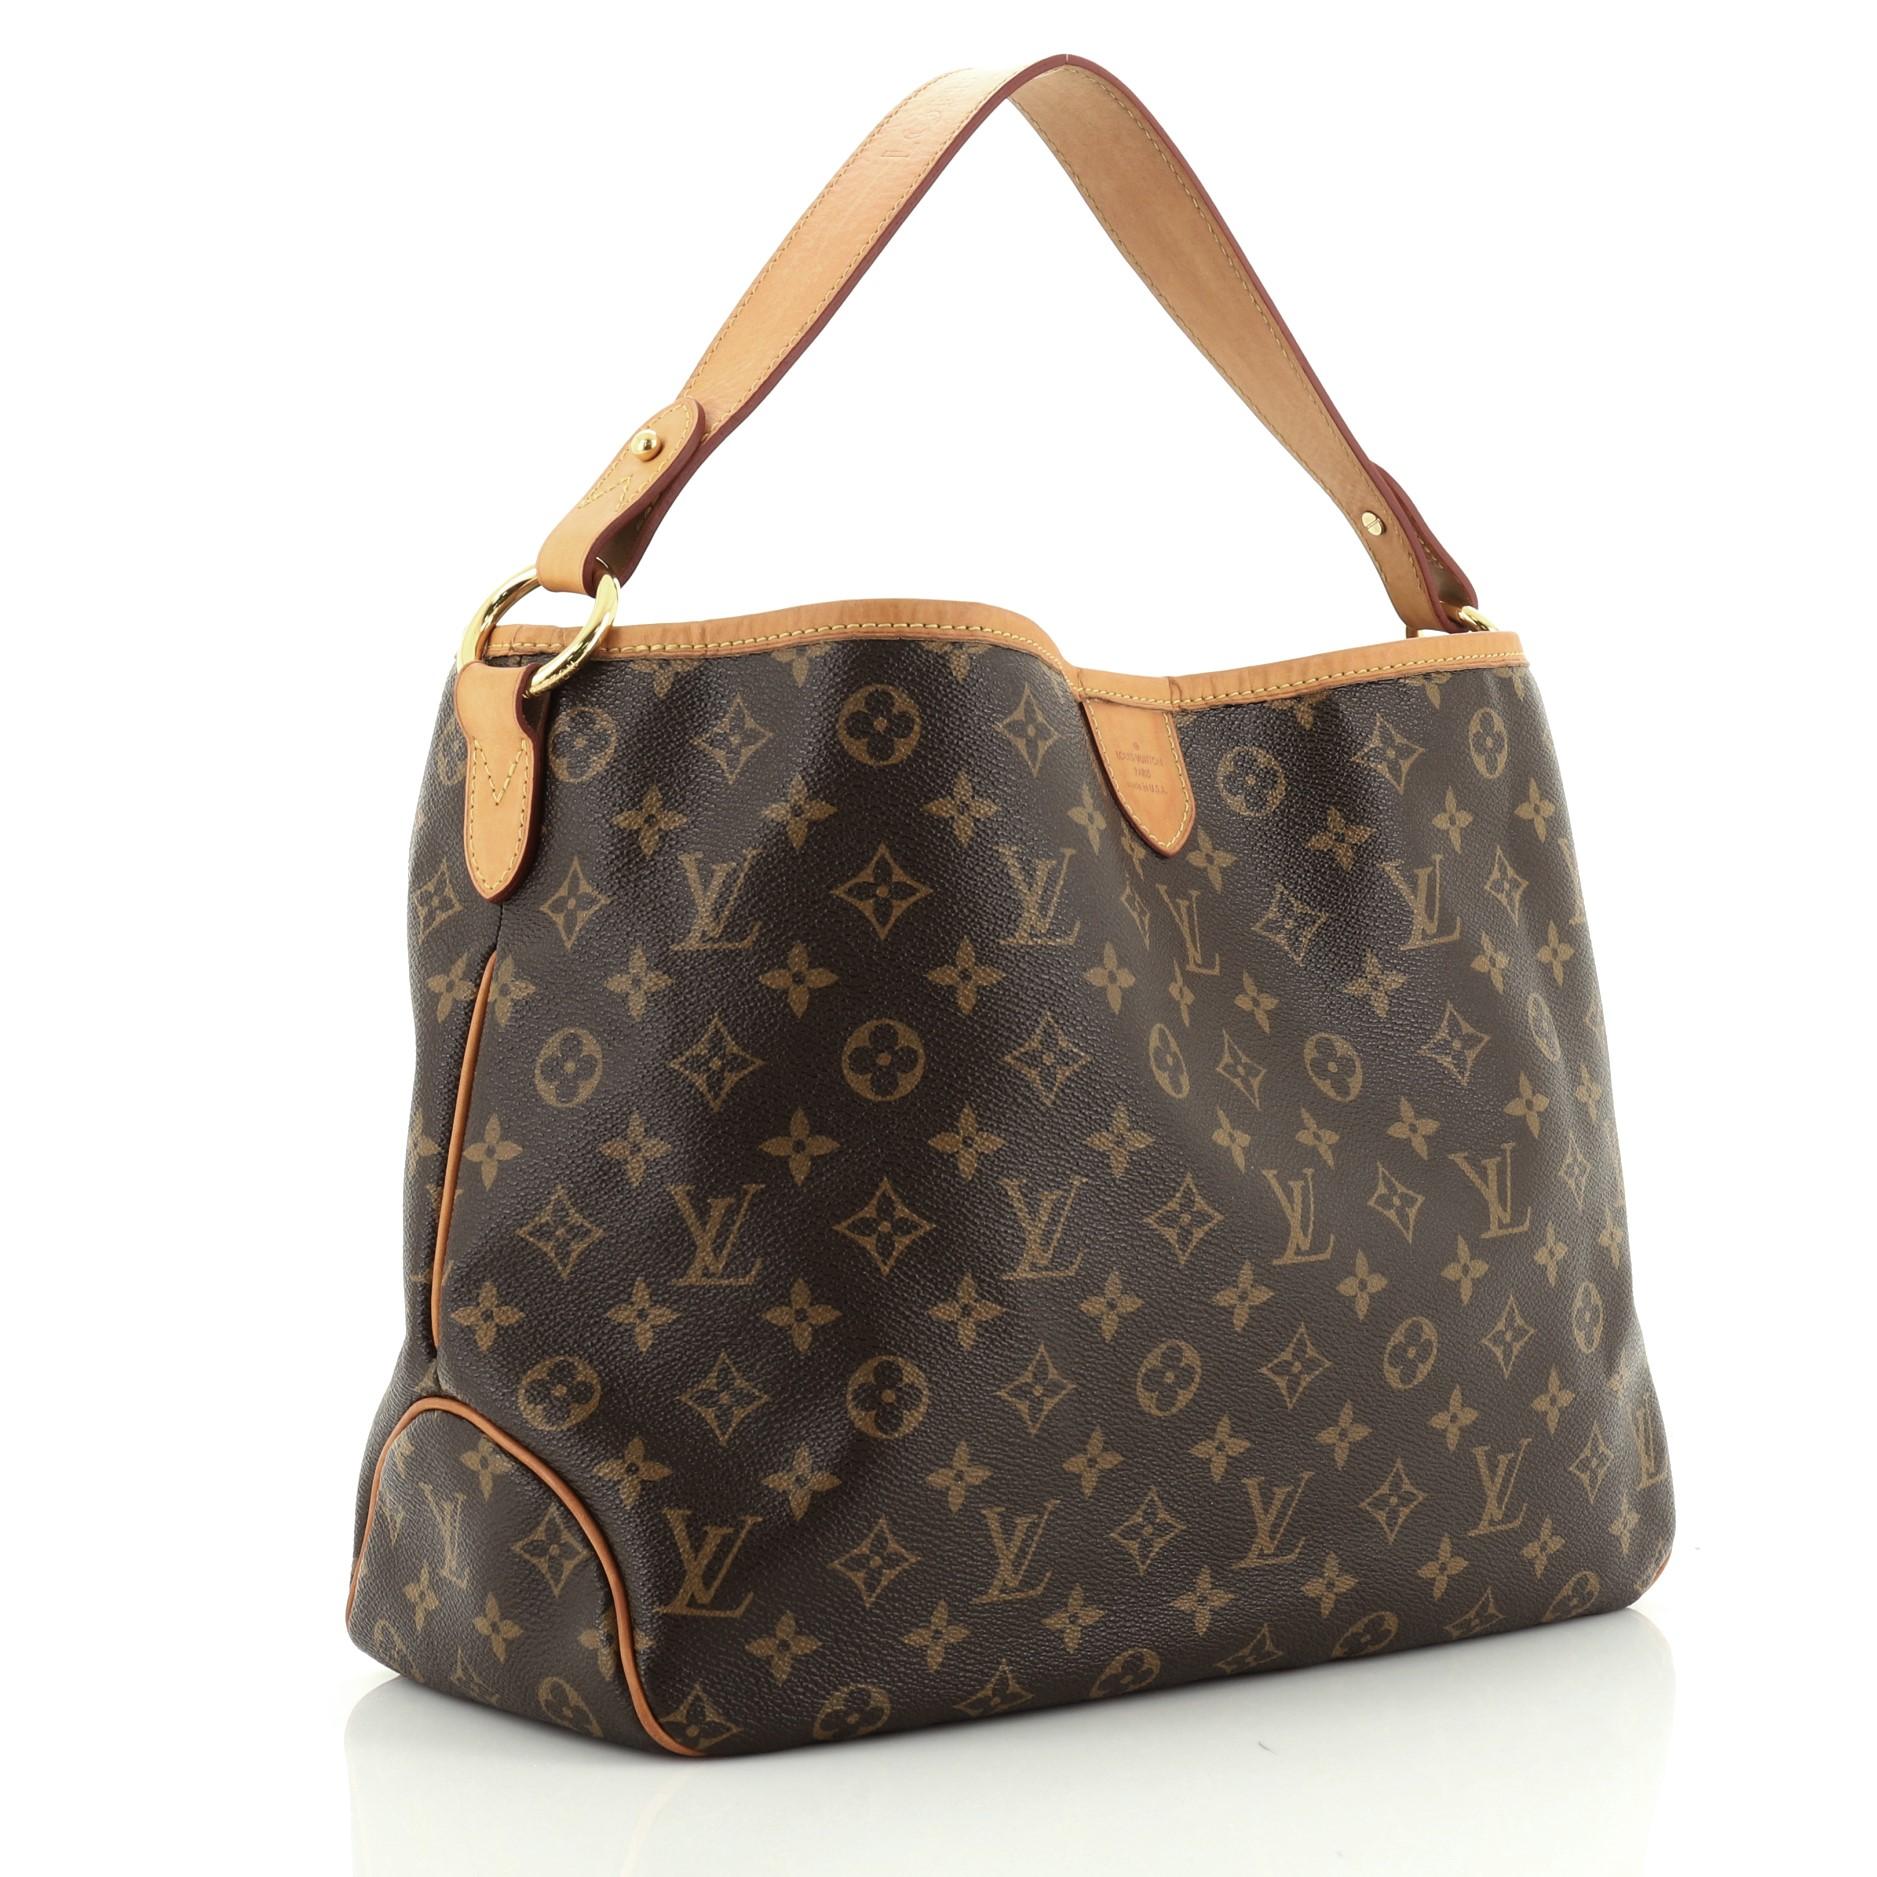 This Louis Vuitton Delightful Handbag Monogram Canvas PM, crafted in brown monogram coated canvas, features a flat leather loop handle, cowhide leather trim, and gold-tone hardware. Its hook closure opens to a neutral fabric interior with side zip